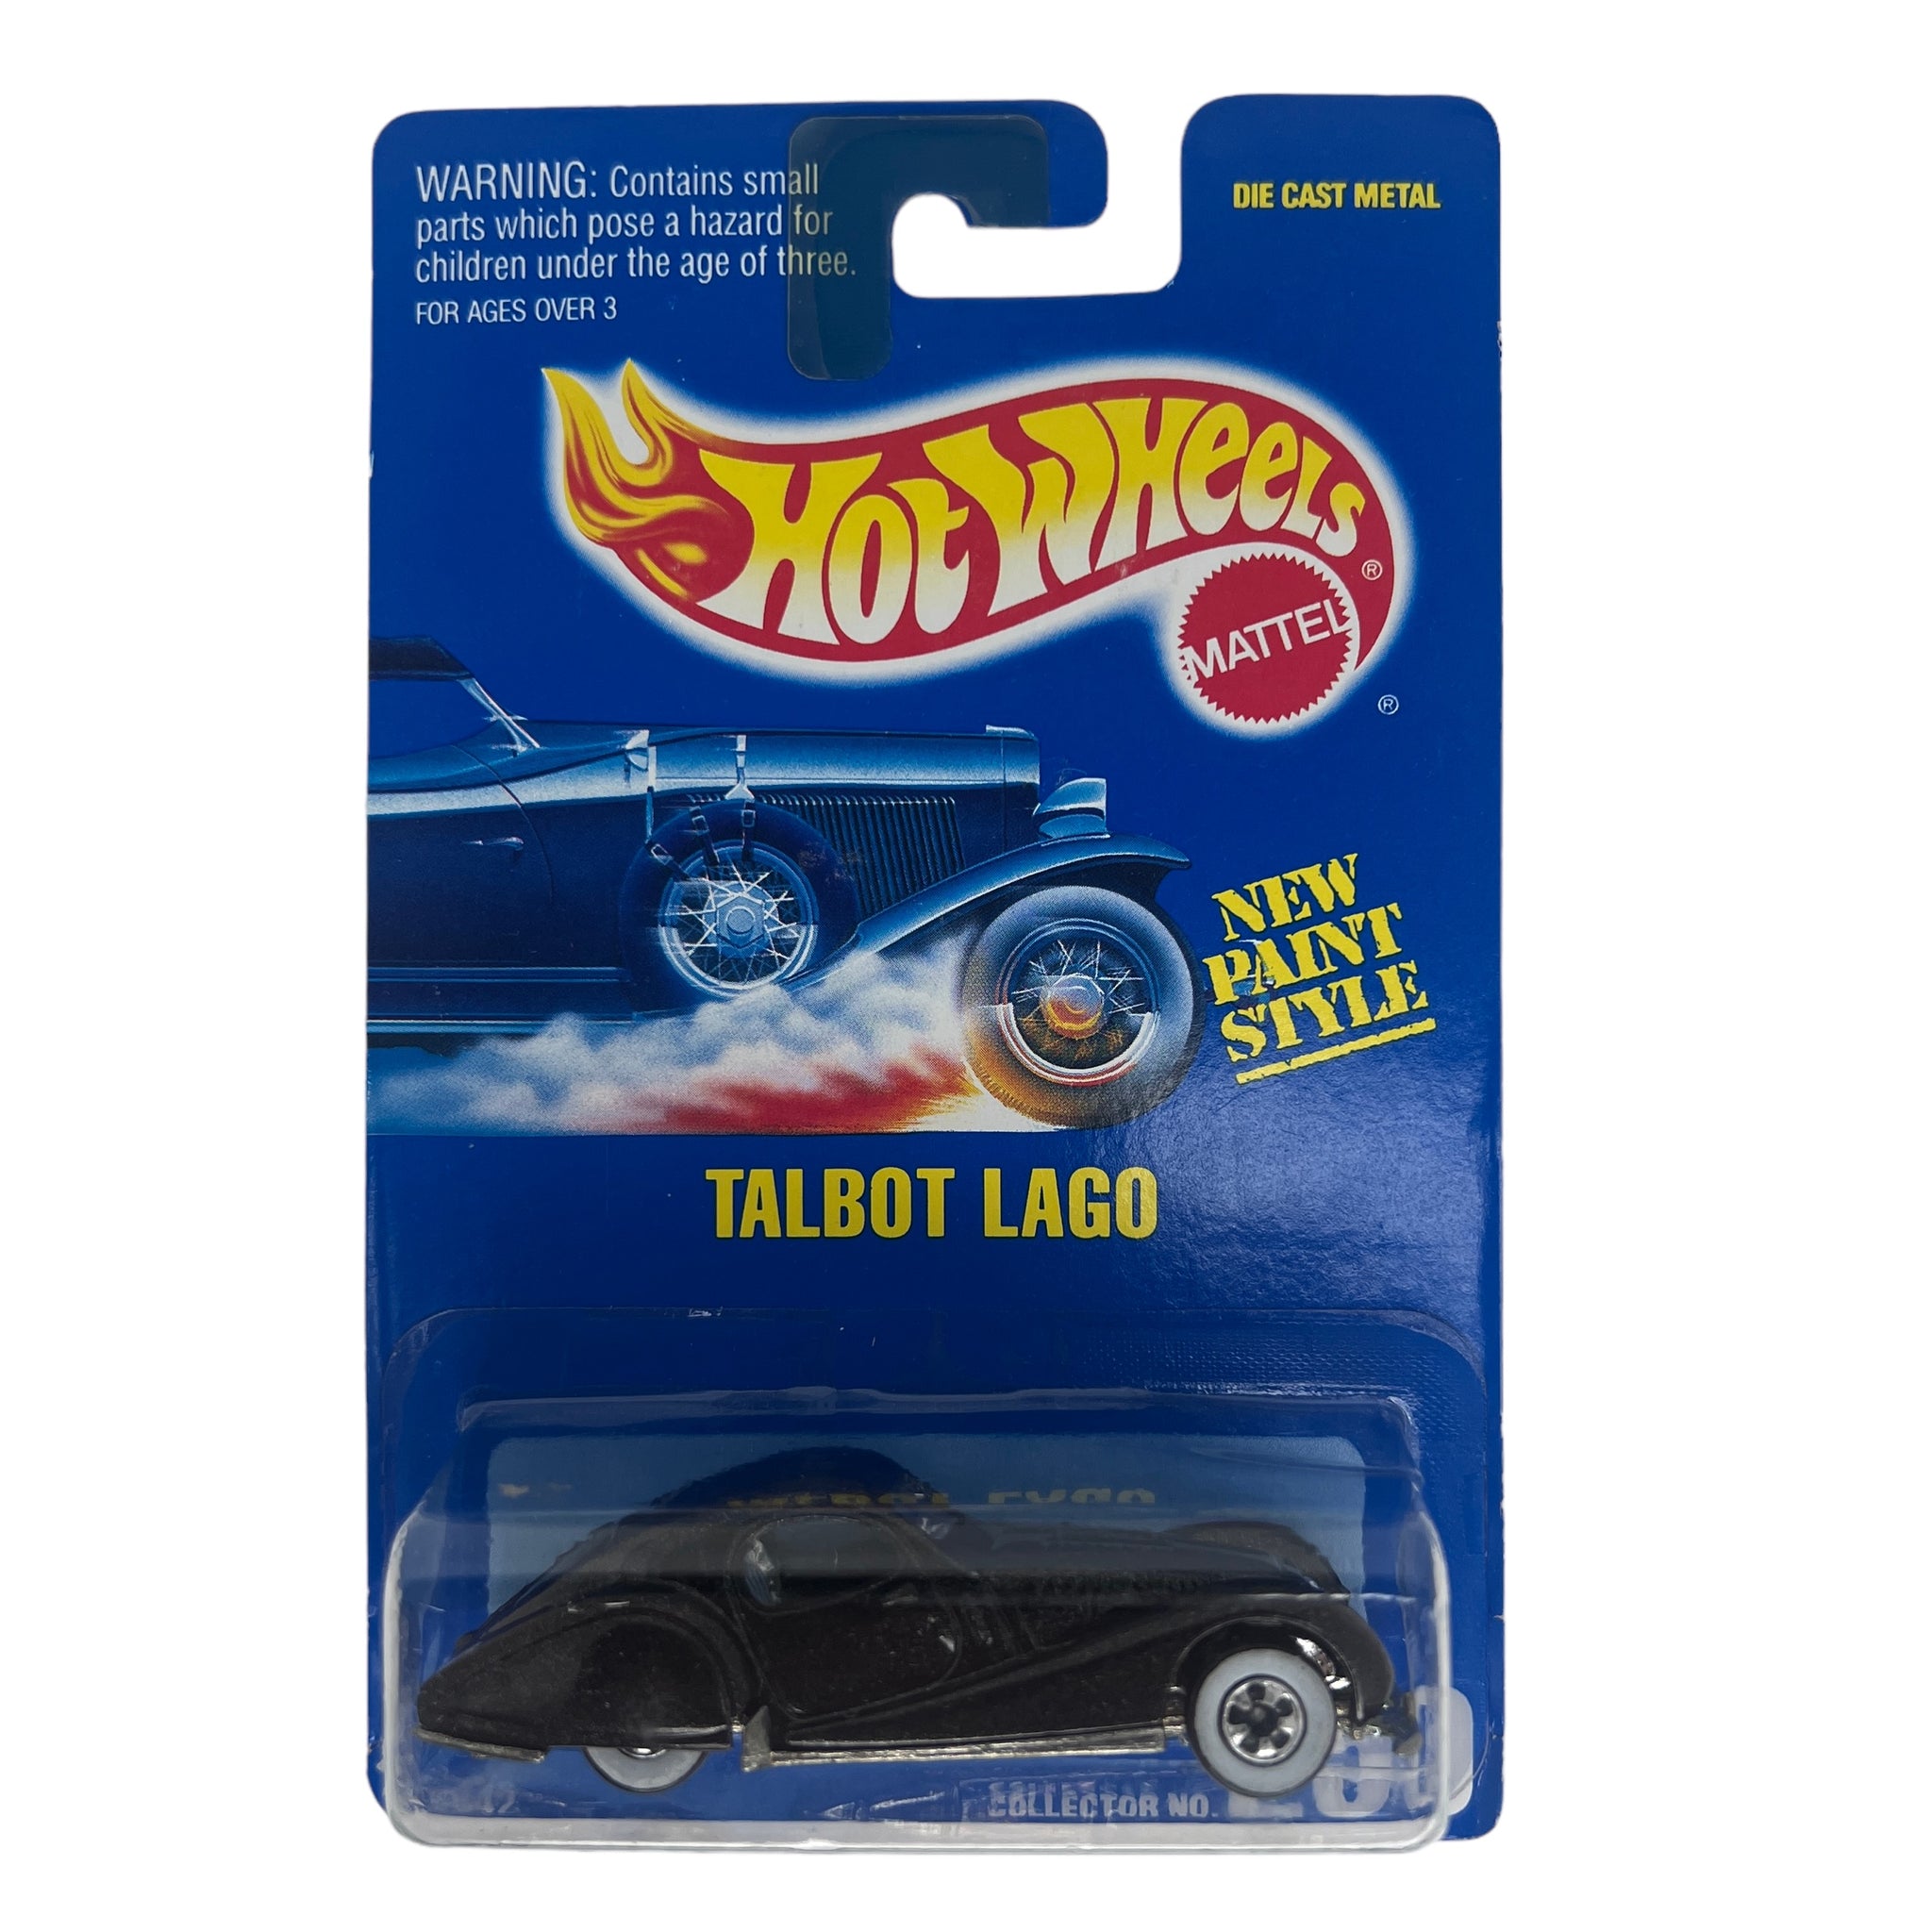 Talbot Lago on Blue Card Collector No. 250